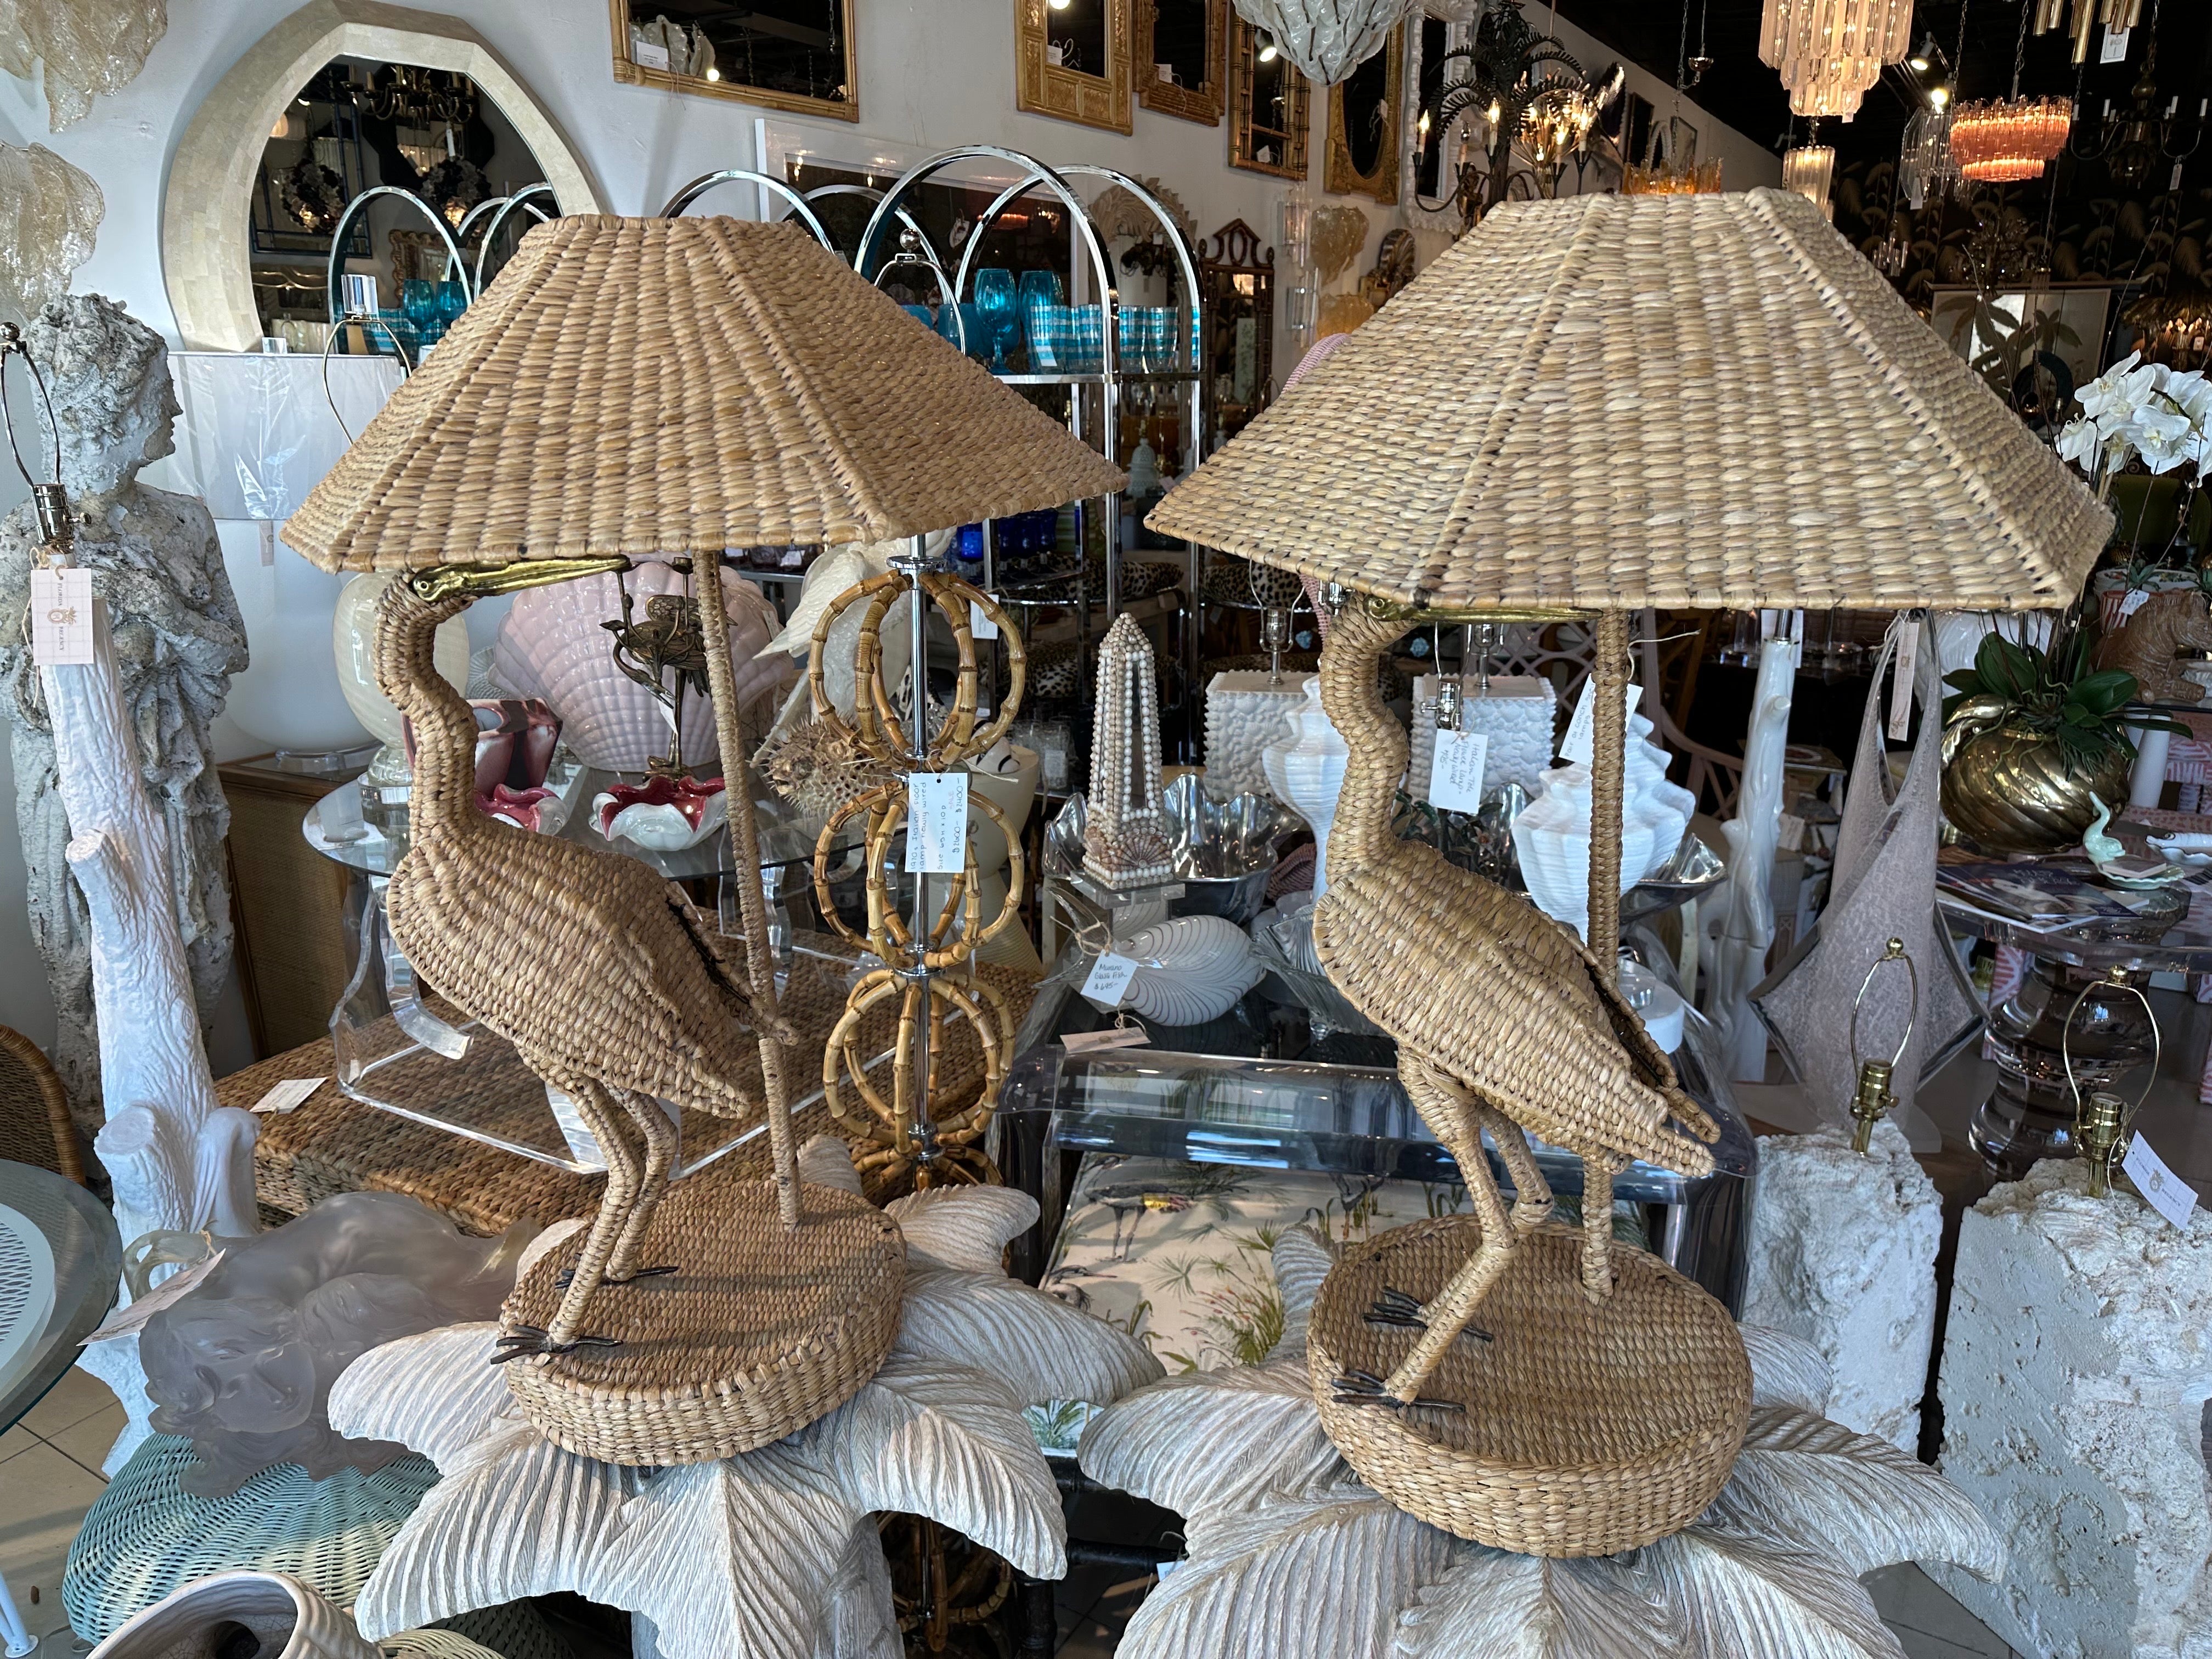 Beautiful vintage 1970s Mario Lopez Torres (marked underneath on both lamps) Heron bird table lamps. Woven rattan and brass accents. May have slight variations as these were handmade. No visible damage or defects. Original wiring, tested. Dimensions